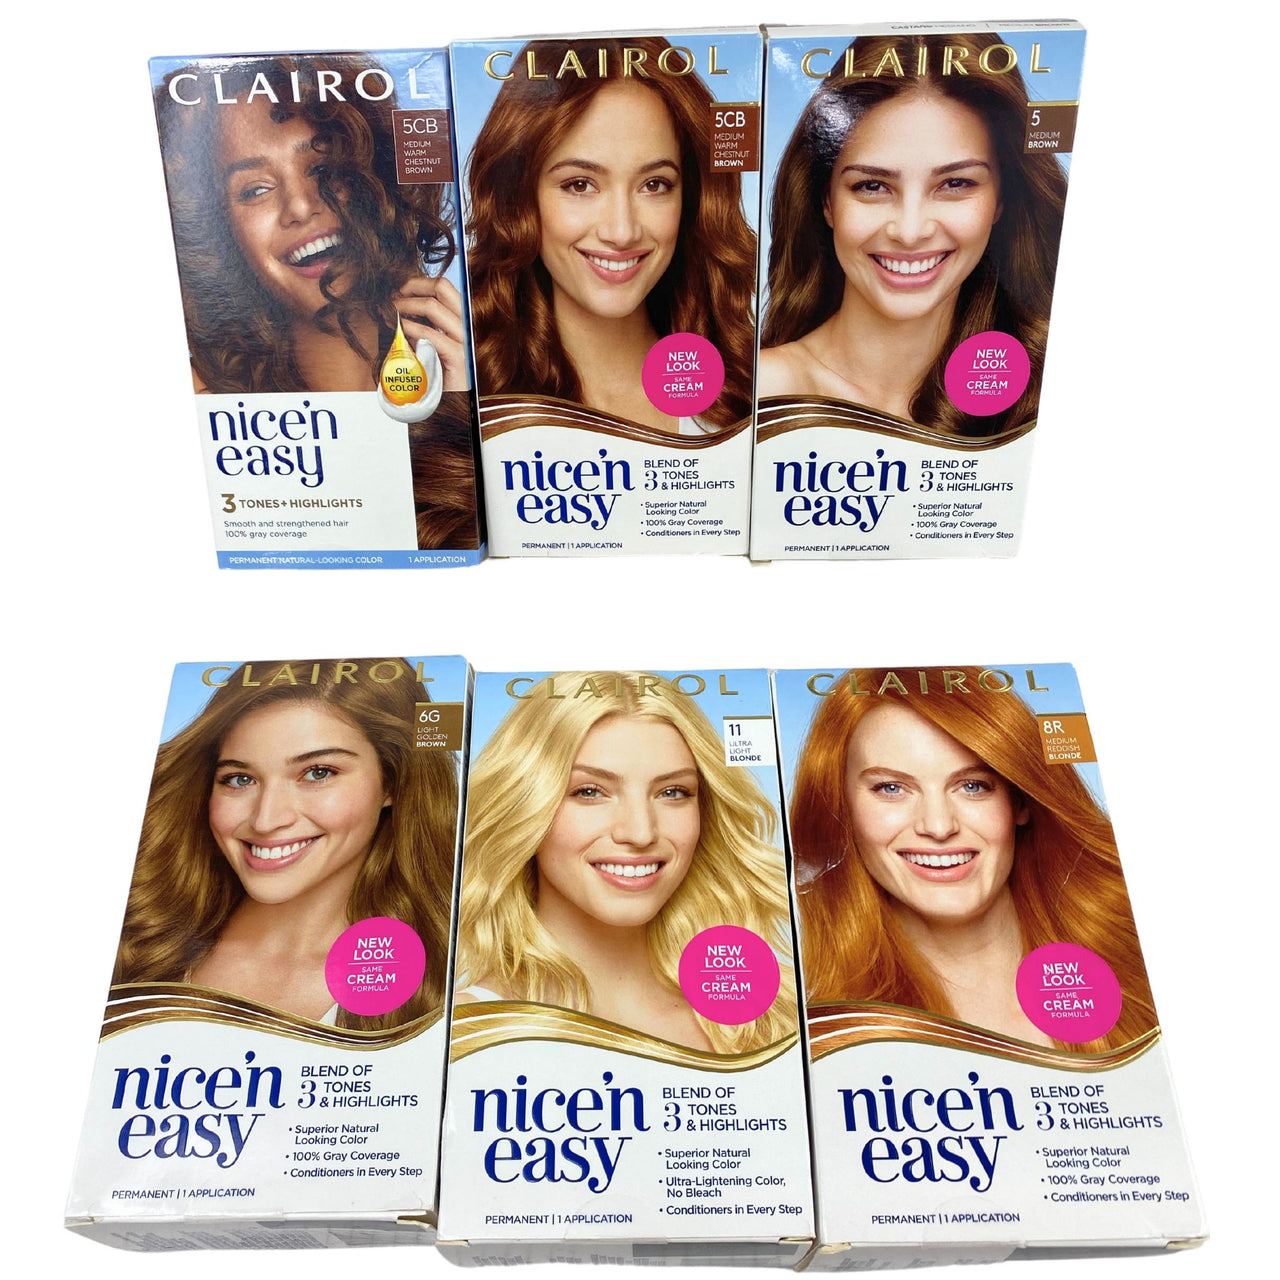 Clairol Nice'n Easy Assorted Mix Assorted Colors Blend of 3 Tones & Highlights